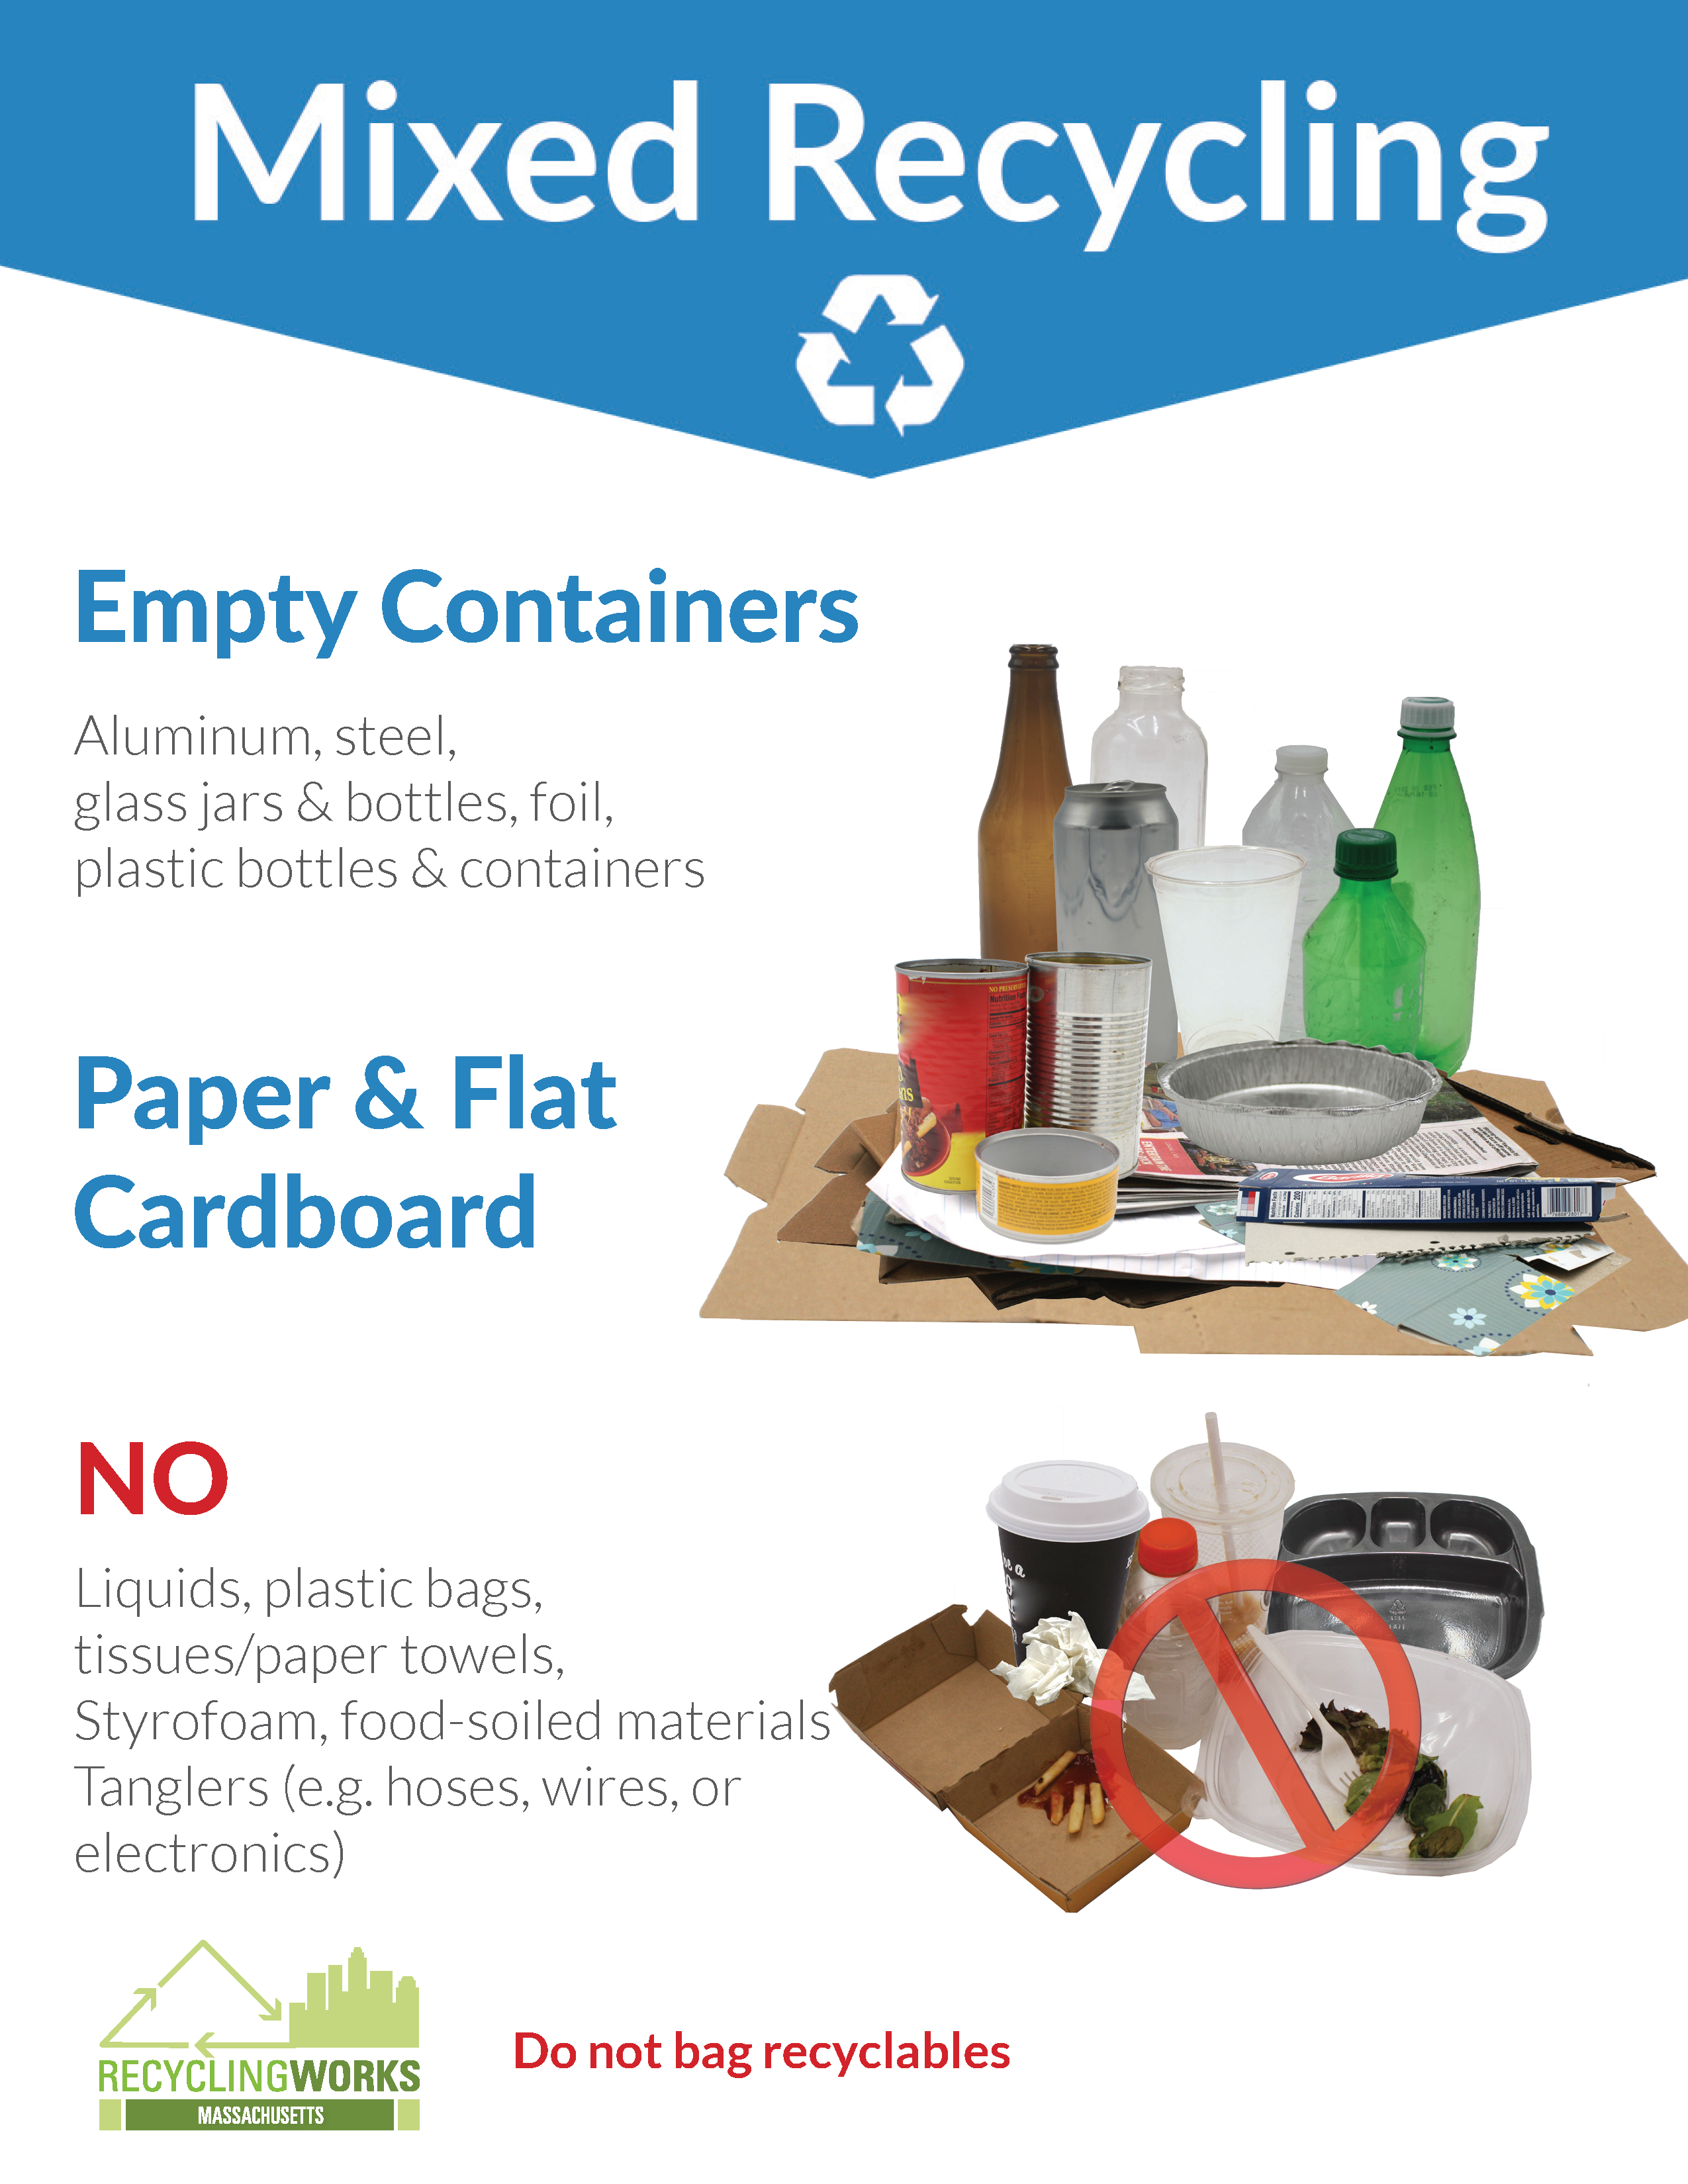 https://recyclingworksma.com/wp-content/uploads/2019/05/Mixed-Recycling.png